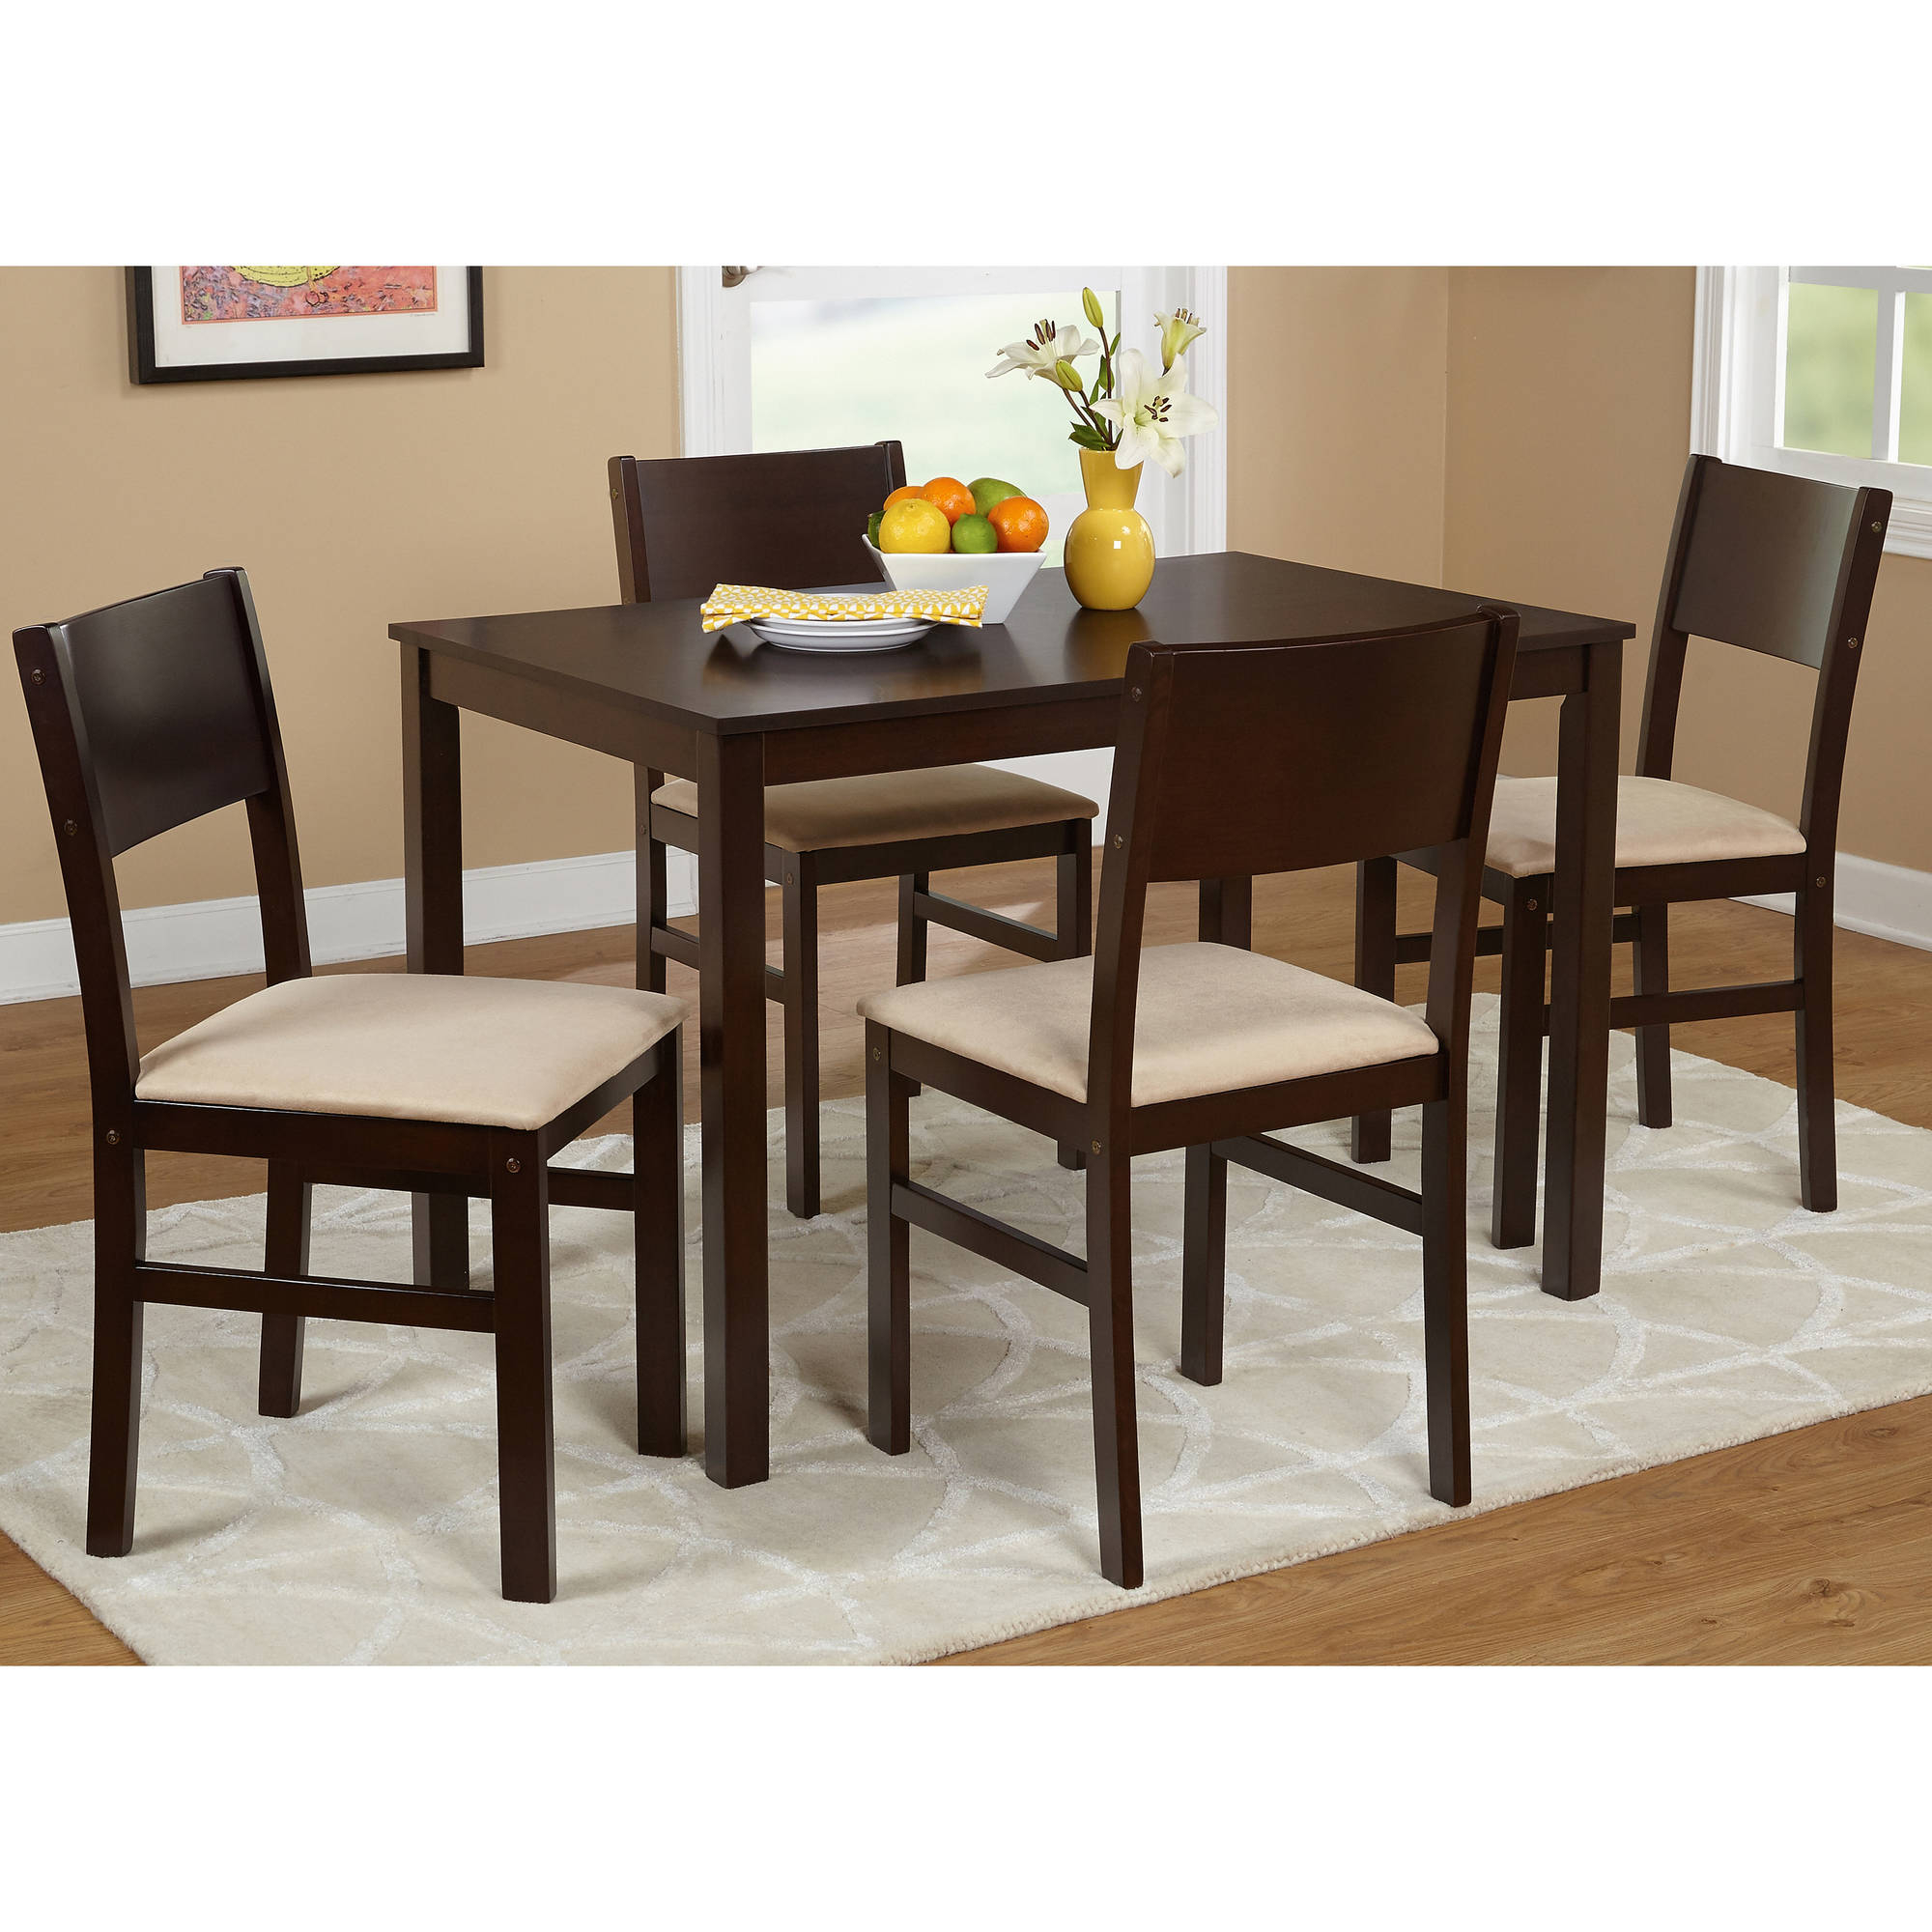 Tms Lucca 5 Piece Dining Set Multiple Colors Walmart with regard to dimensions 2000 X 2000